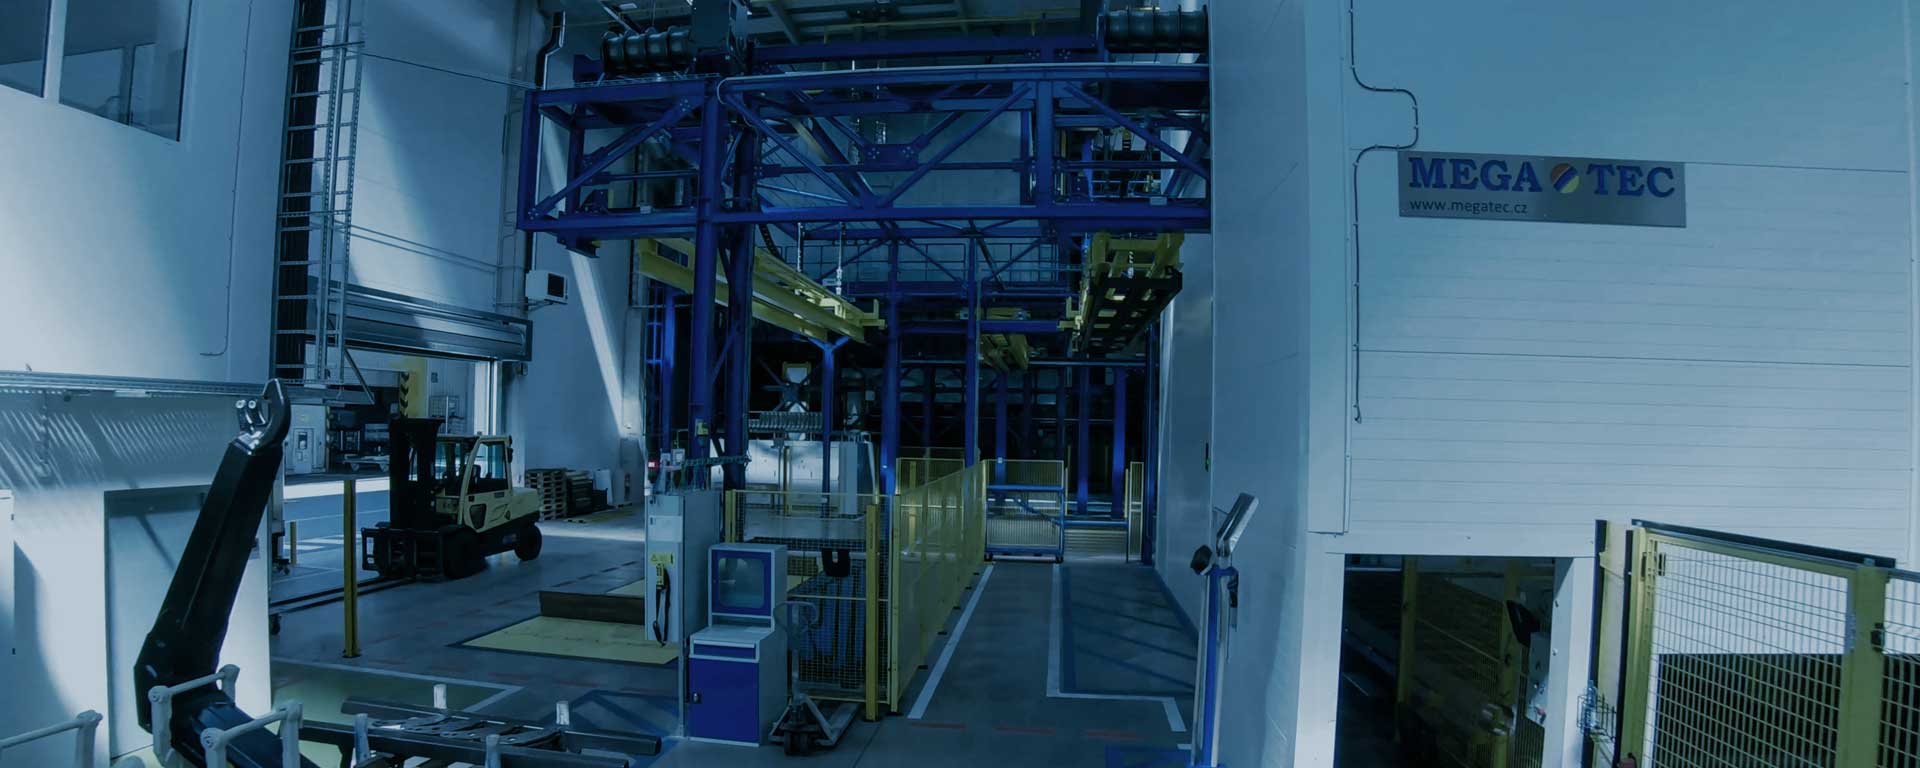 Turnkey cataphoretic coating lines for F.X. MEILLER